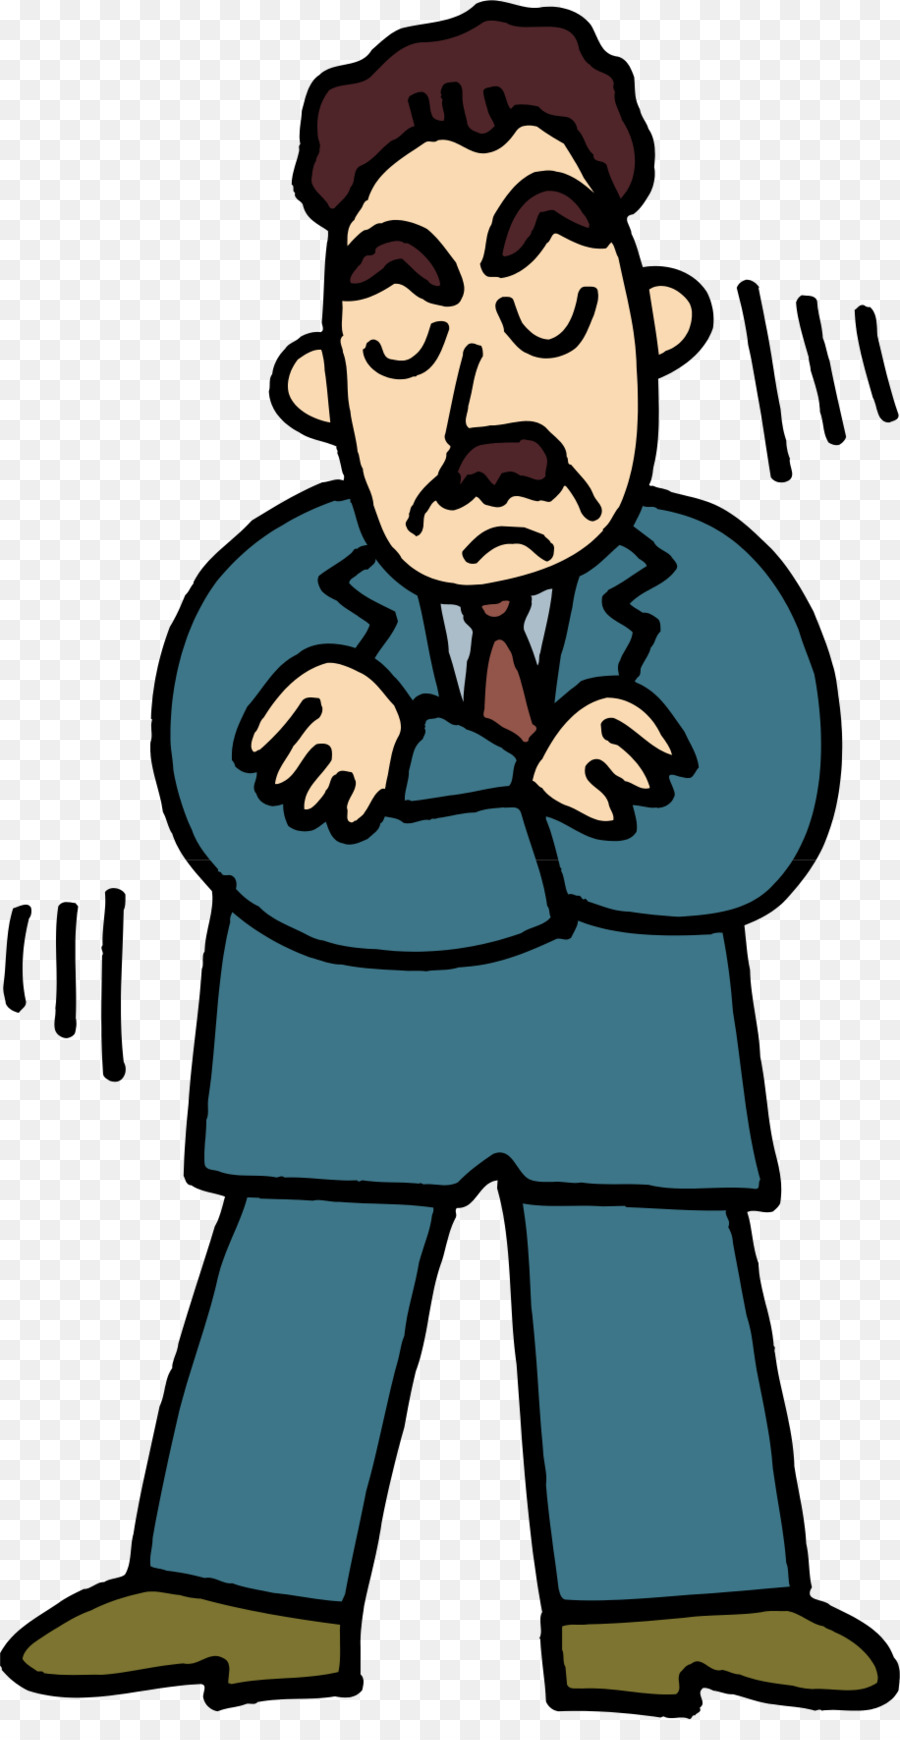 Clip art - Angry man png download - 916*1751 - Free Transparent  Encapsulated PostScript png Download.